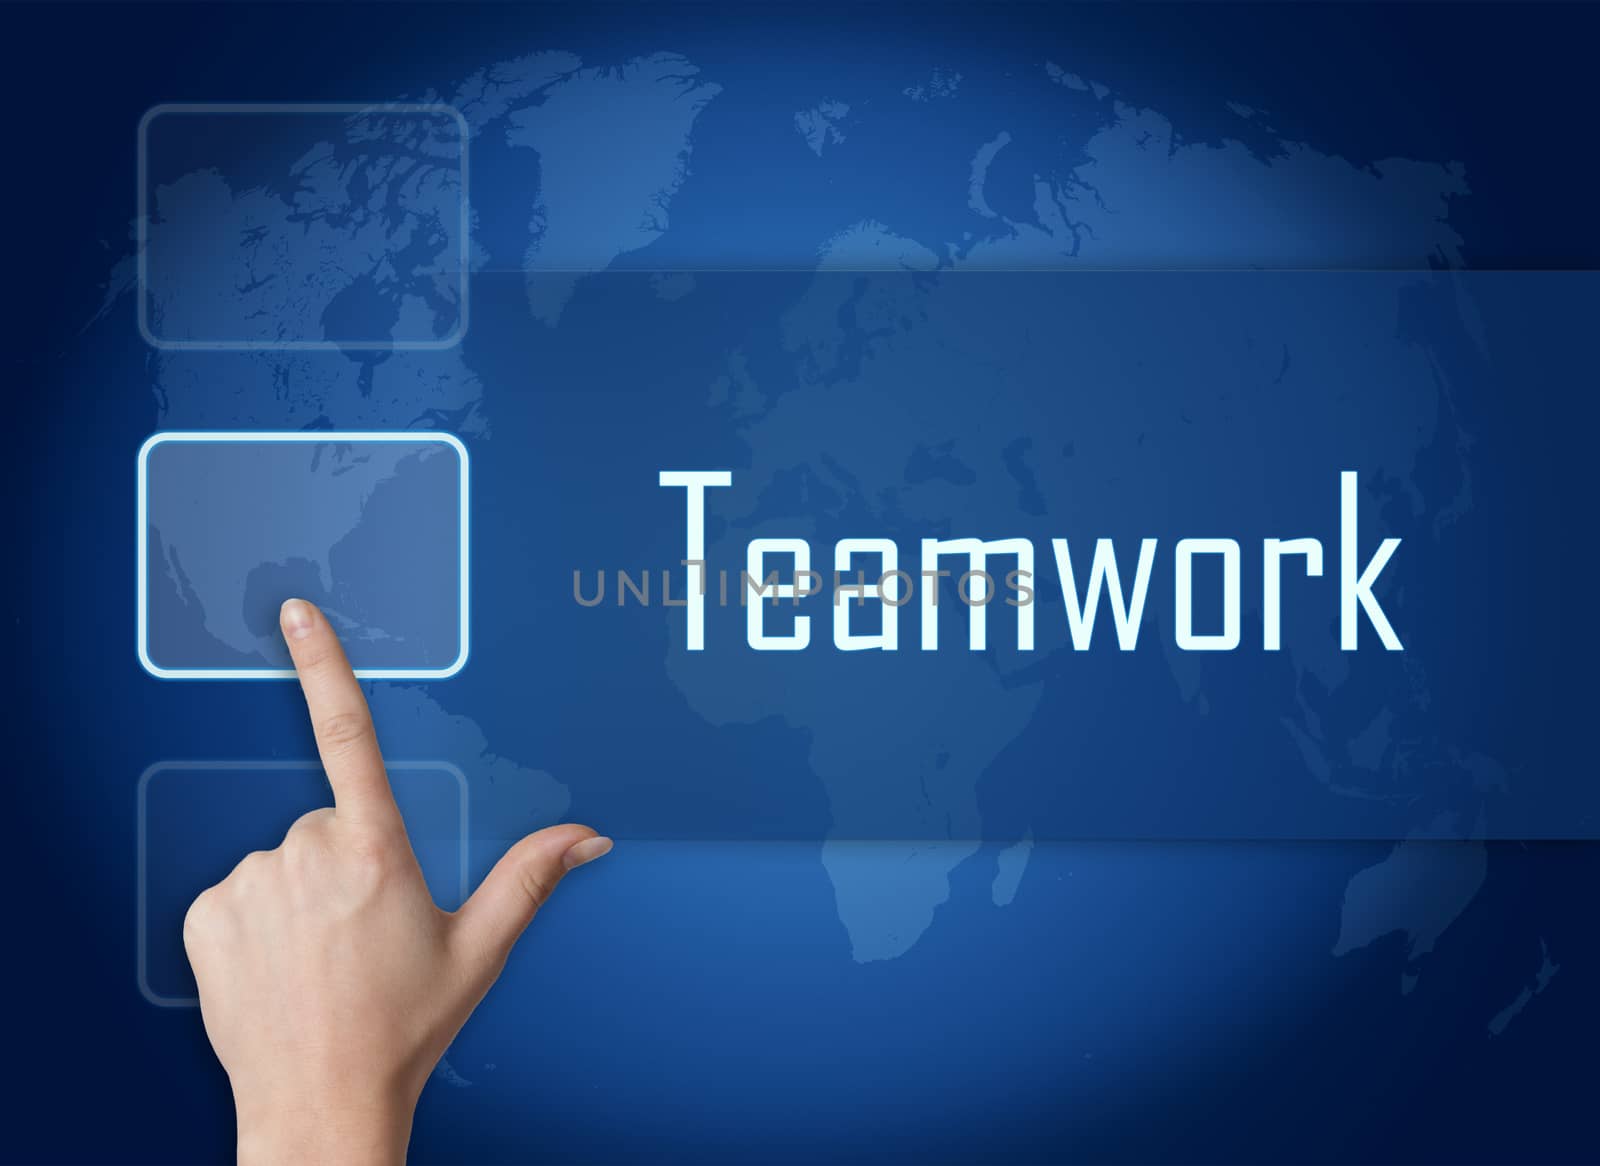 Teamwork concept with interface and world map on blue background